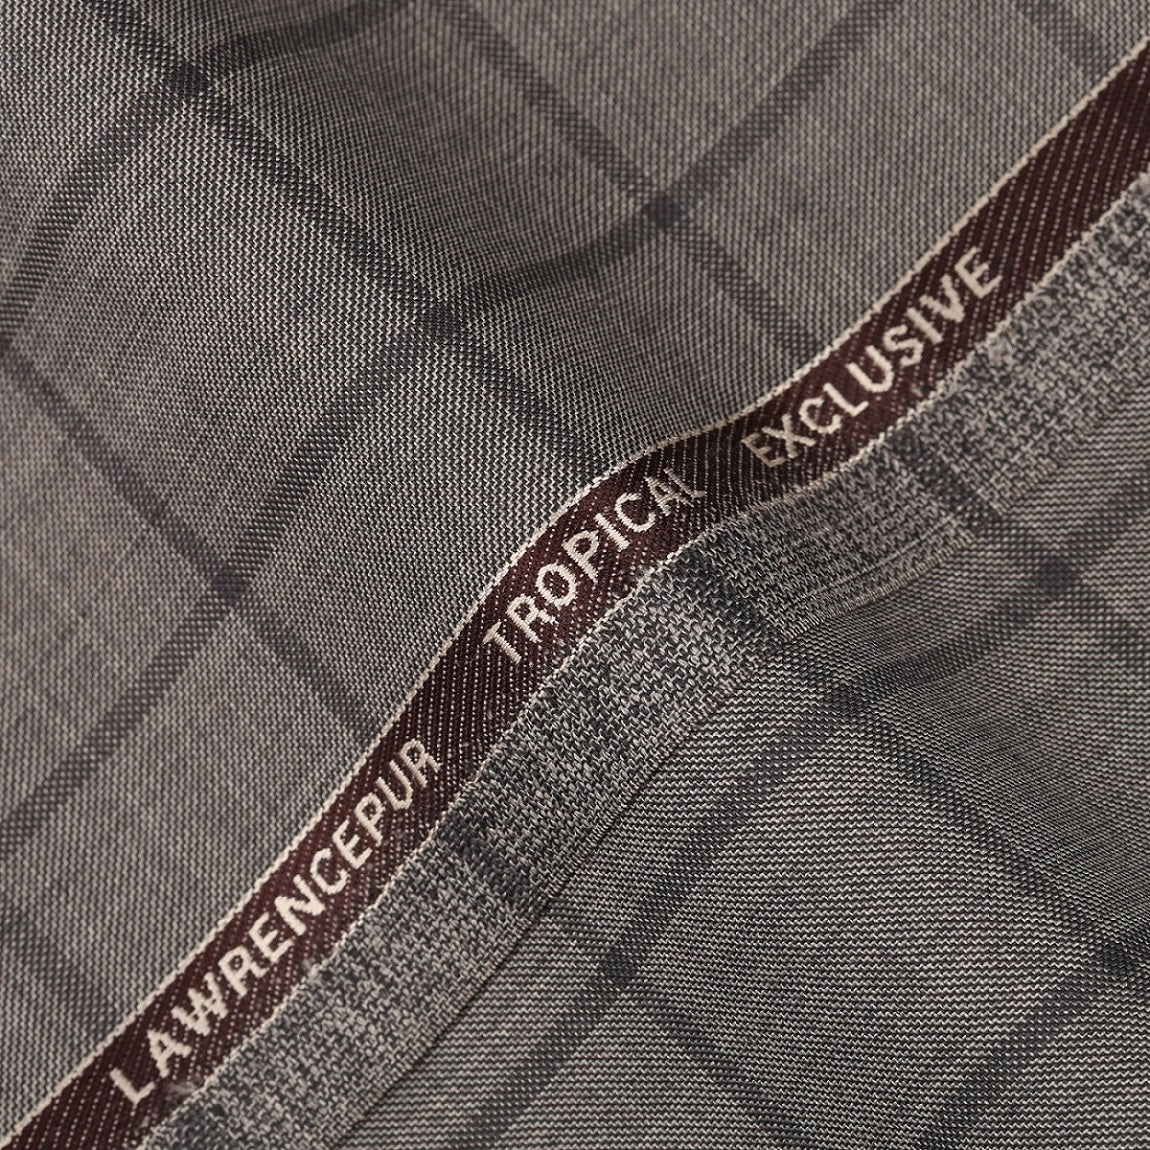 Windowpane Checks-Steel Grey, Wool Blend, Tropical Exclusive Suiting Fabric